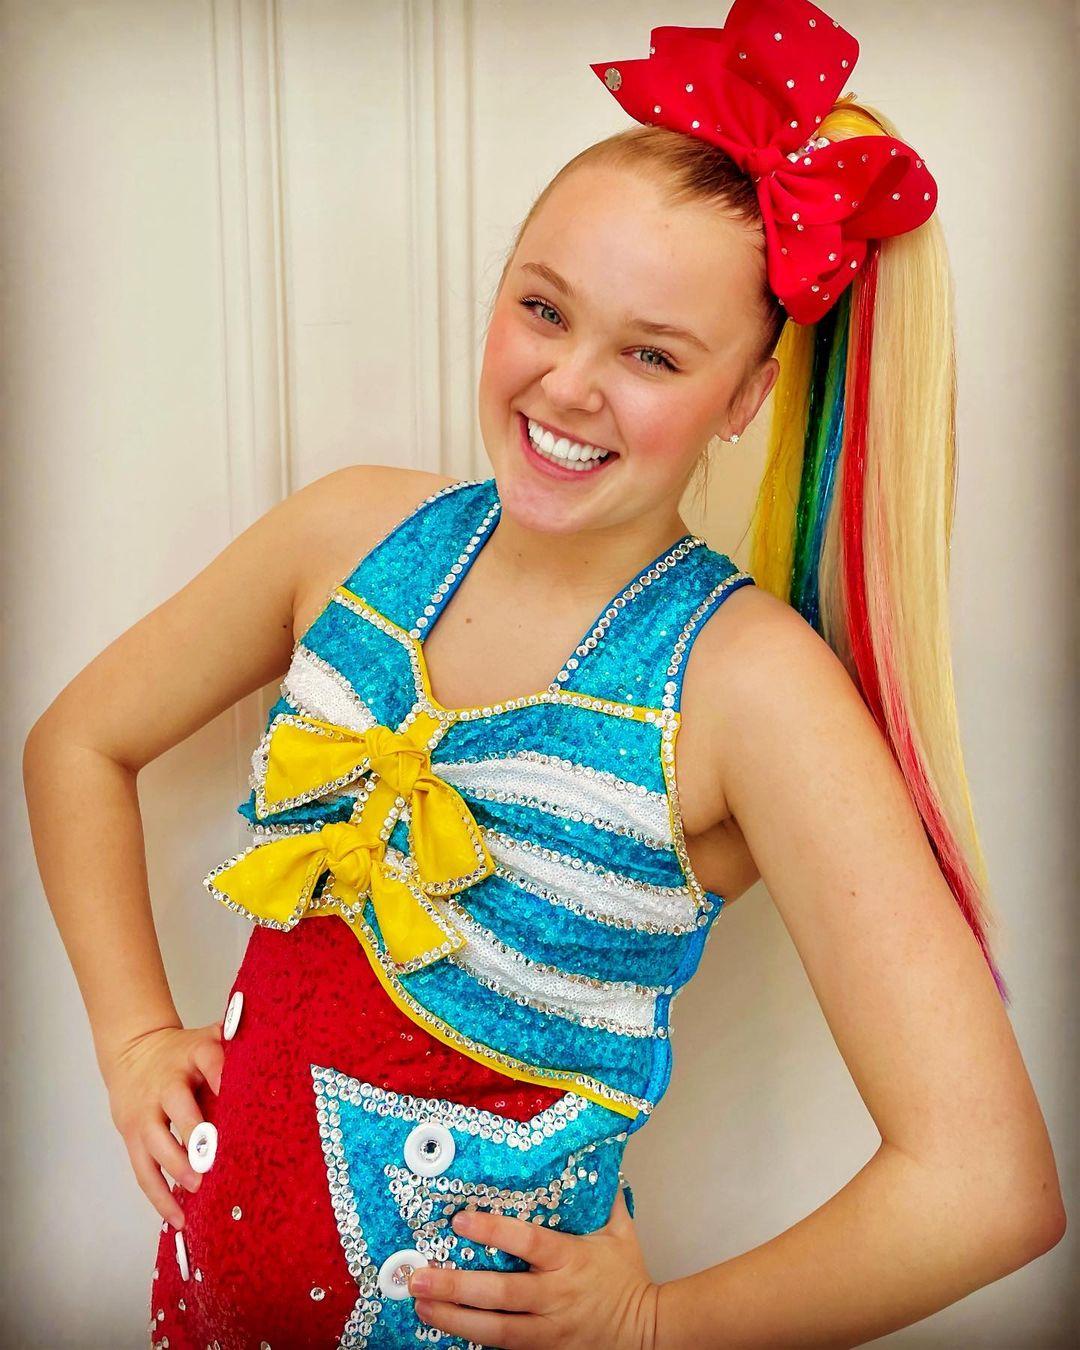 JoJo Siwa BLASTS Nickelodeon Over Rights To Perform Her Own Music